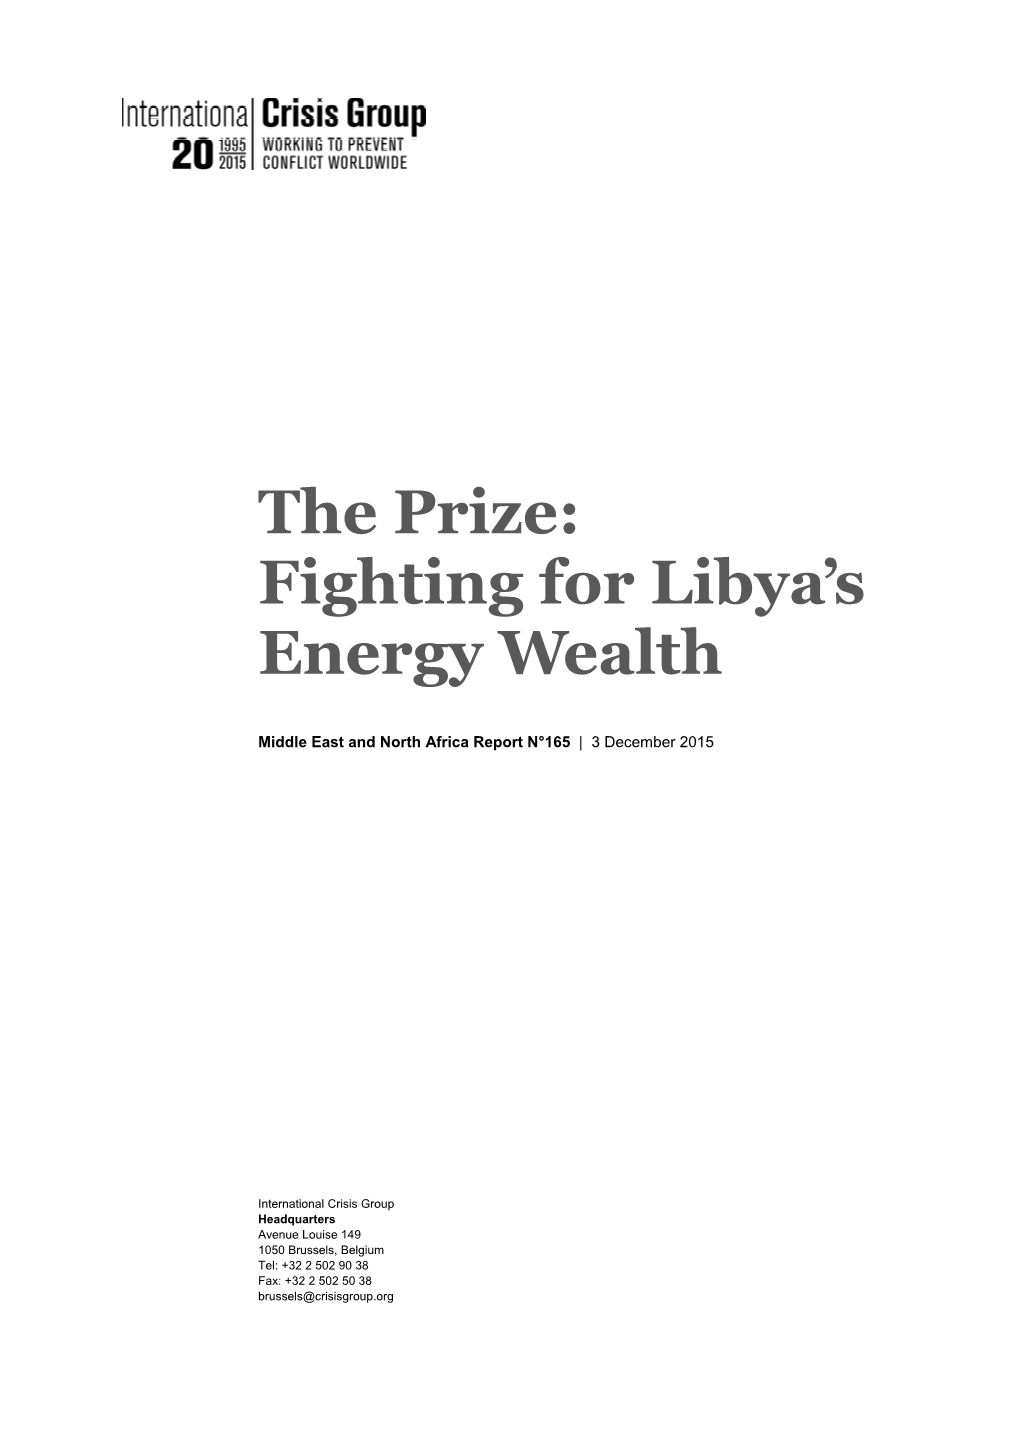 The Prize: Fighting for Libya's Energy Wealth